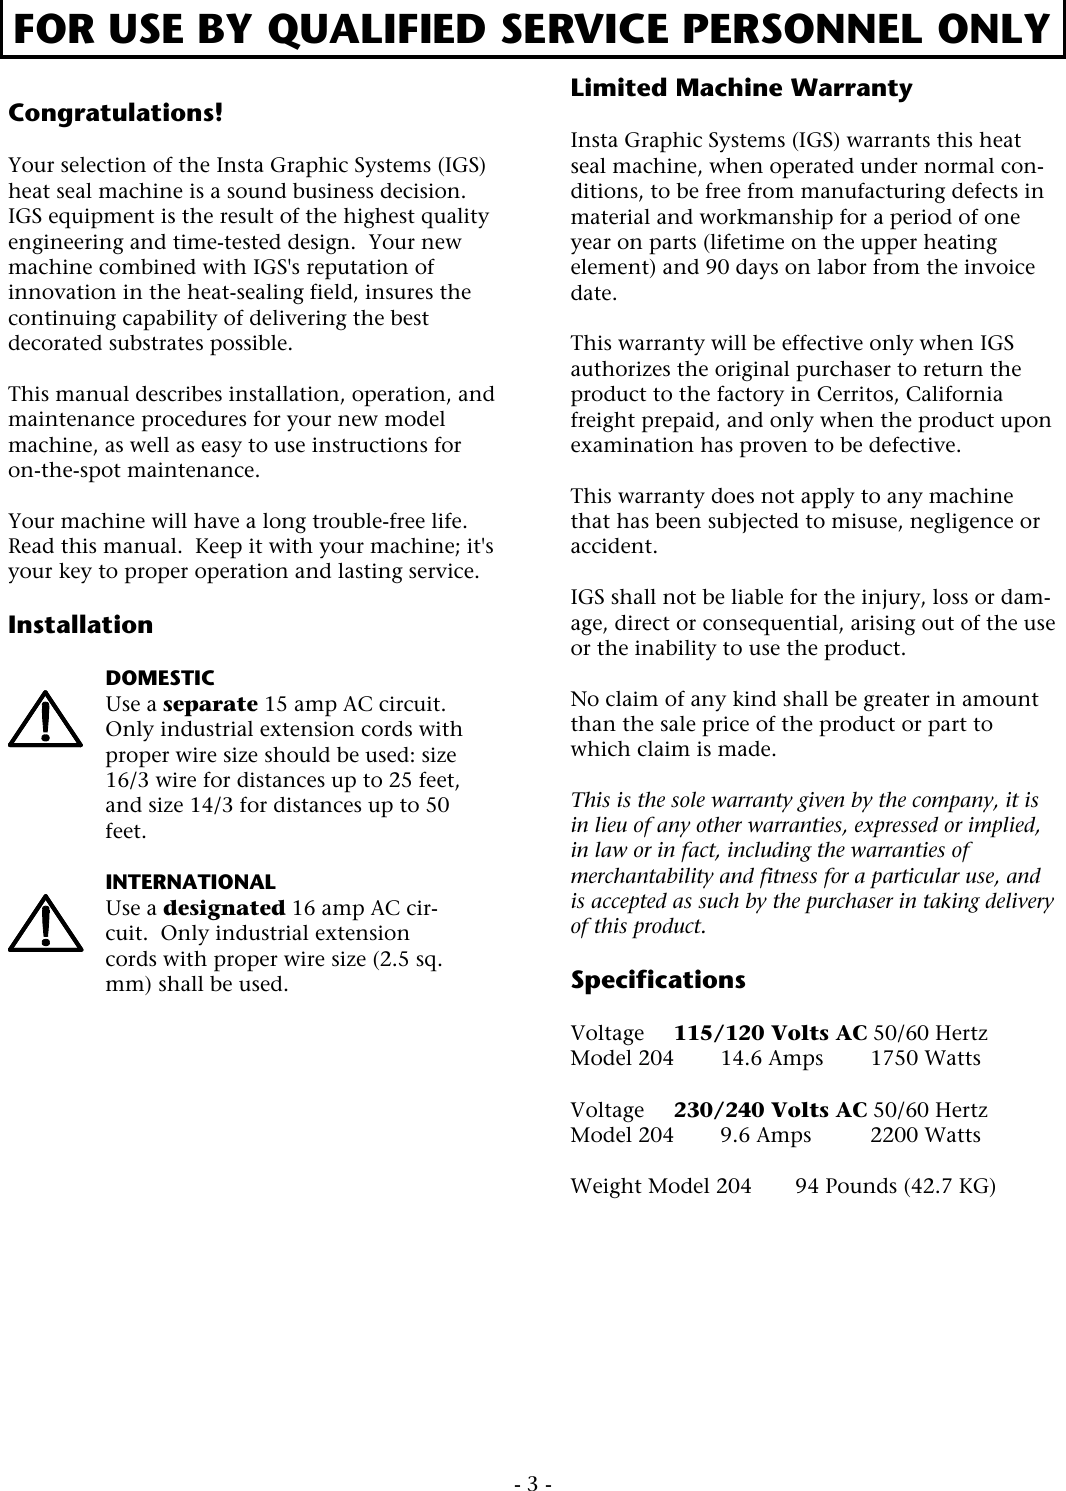 Page 3 of 12 - ACE&EASTMAN Instagraphic 204 Parts & Instructions - 204A Manual English 040819 User